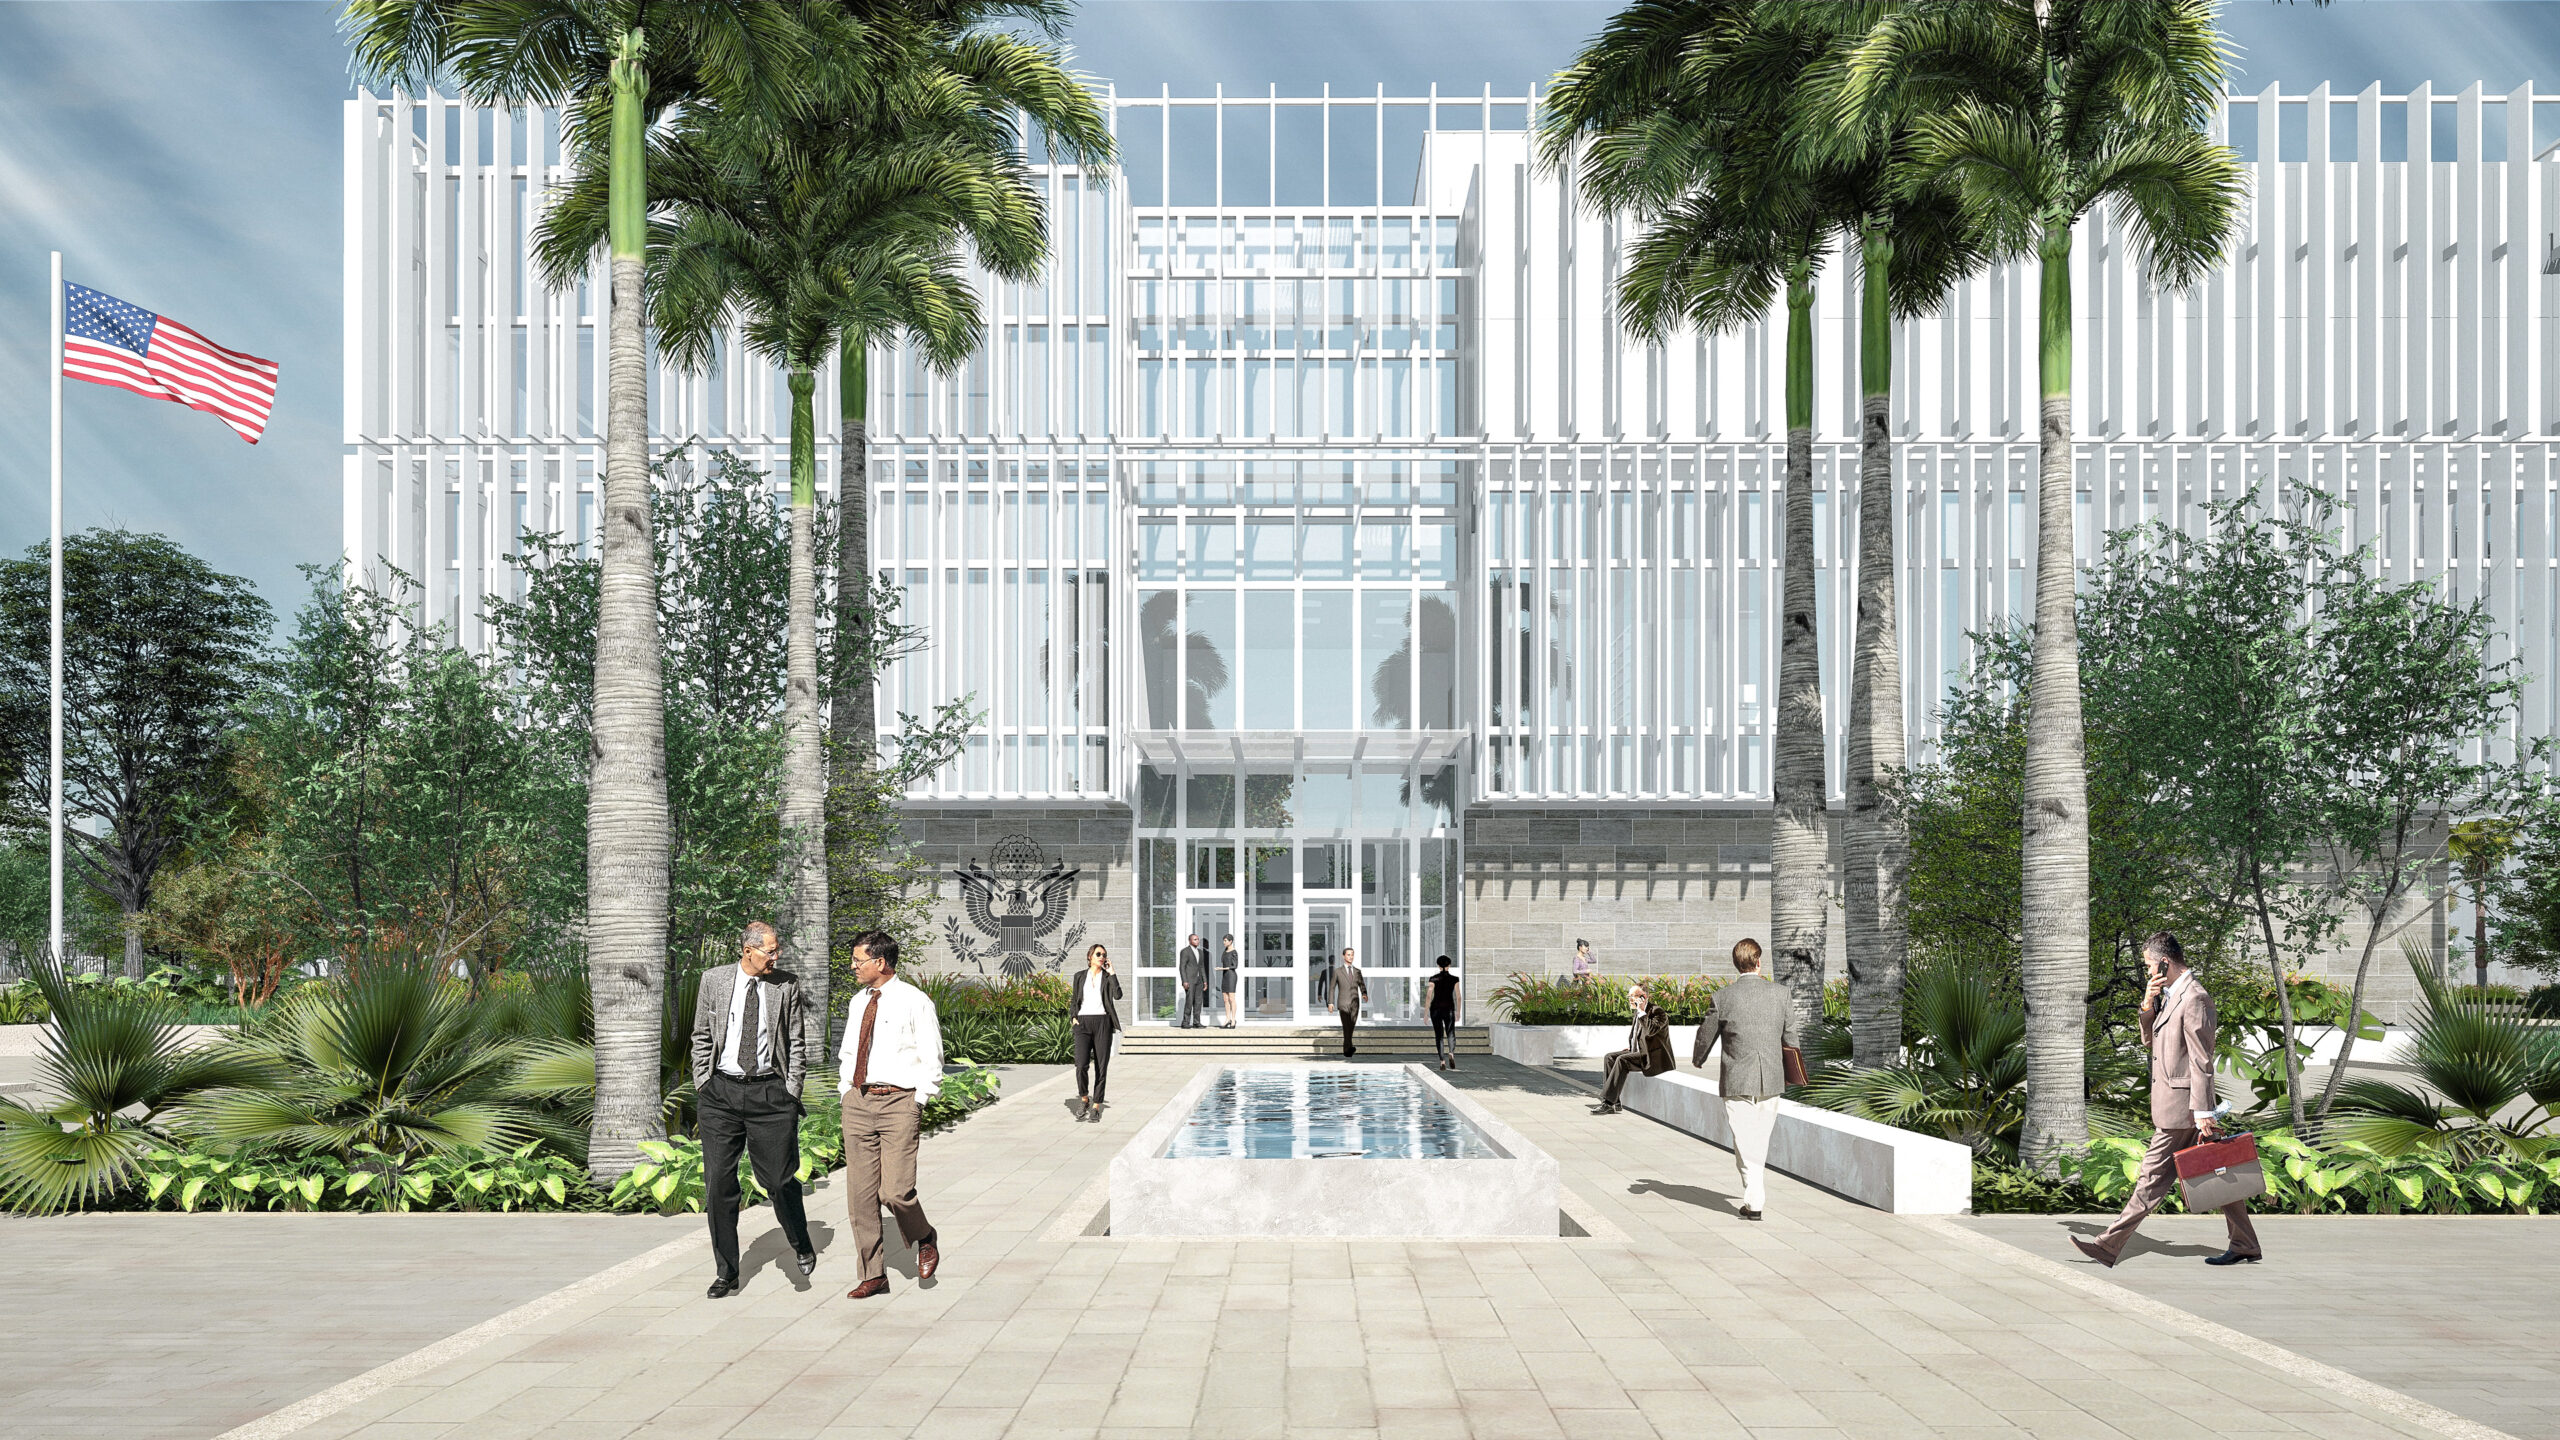 Exterior depiction of the main entry for the new U.S. consulate general in Merida.